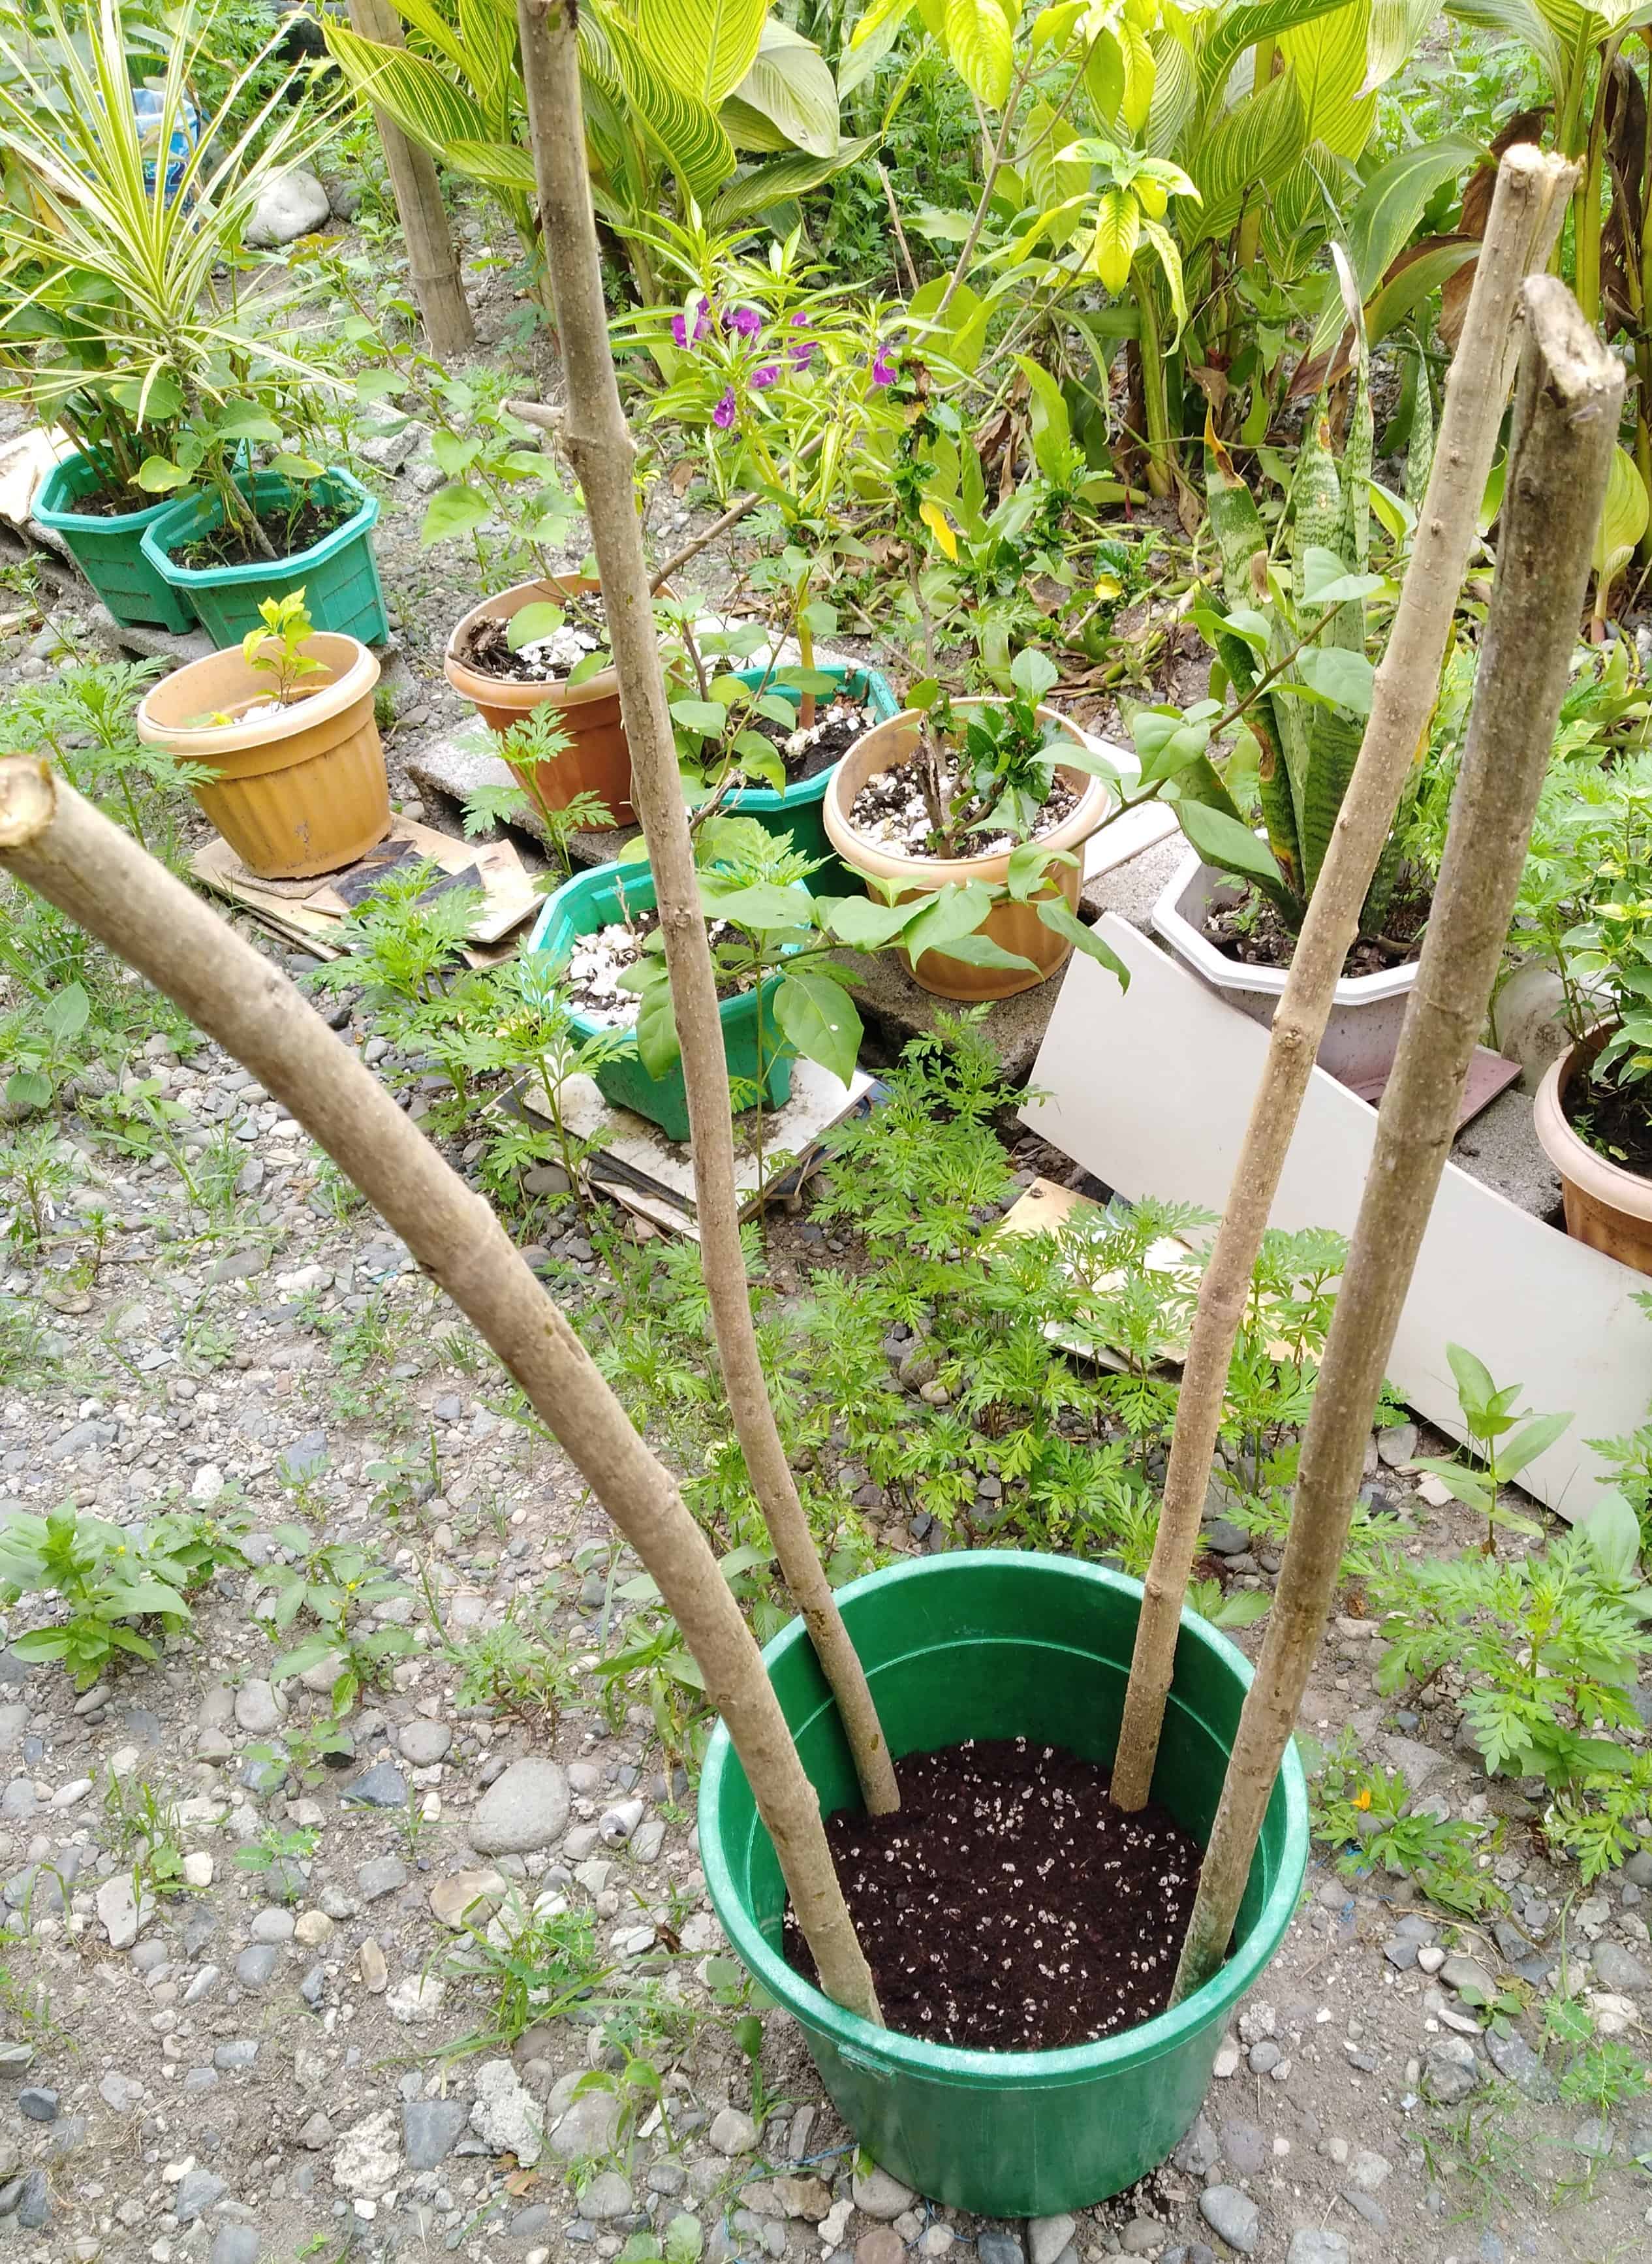 4 sturdy bamboo stakes placed in each side of the green bucket with soil to form a square